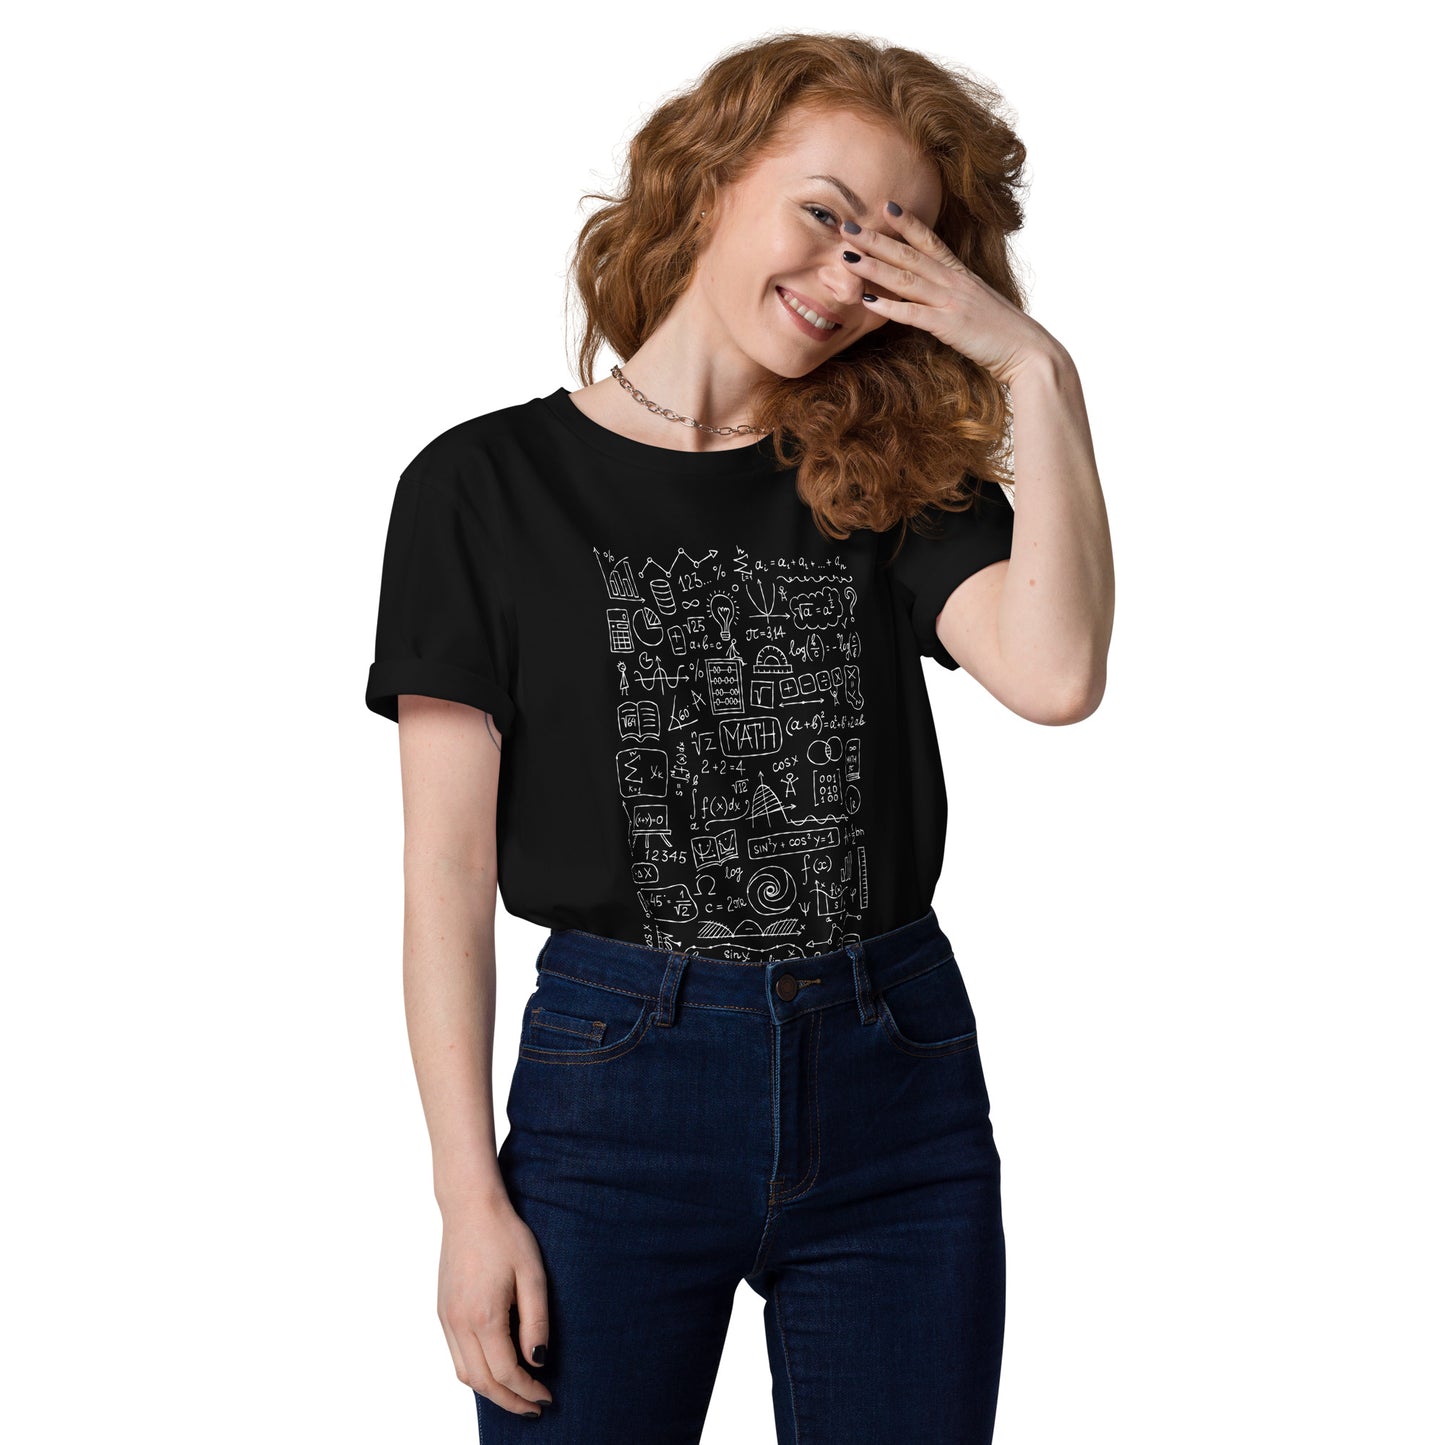 Smiling Girl in Unisex black T-Shirt for Math Enthusiasts. with Hand-Drawn Math formulas and symbols. 